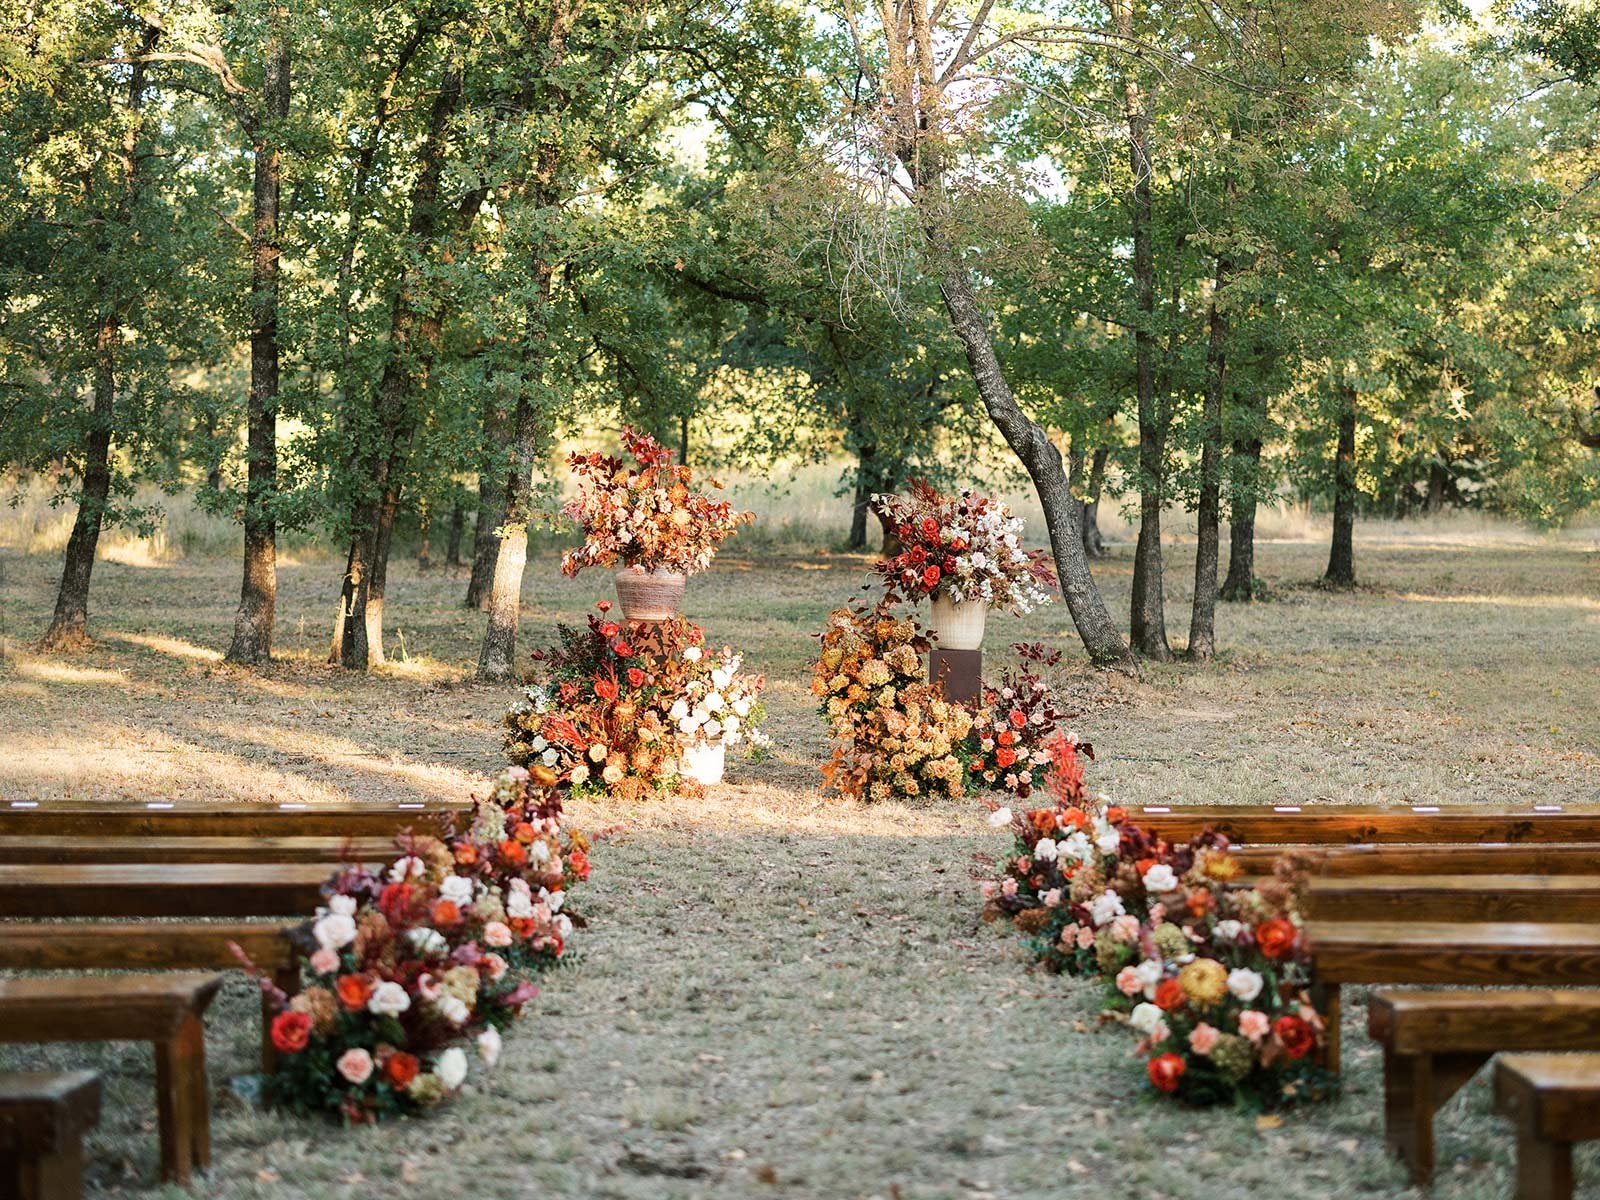 Ranch wedding ceremony with red flowers and brown benches | Designed and Planned by Shannon Rose Events